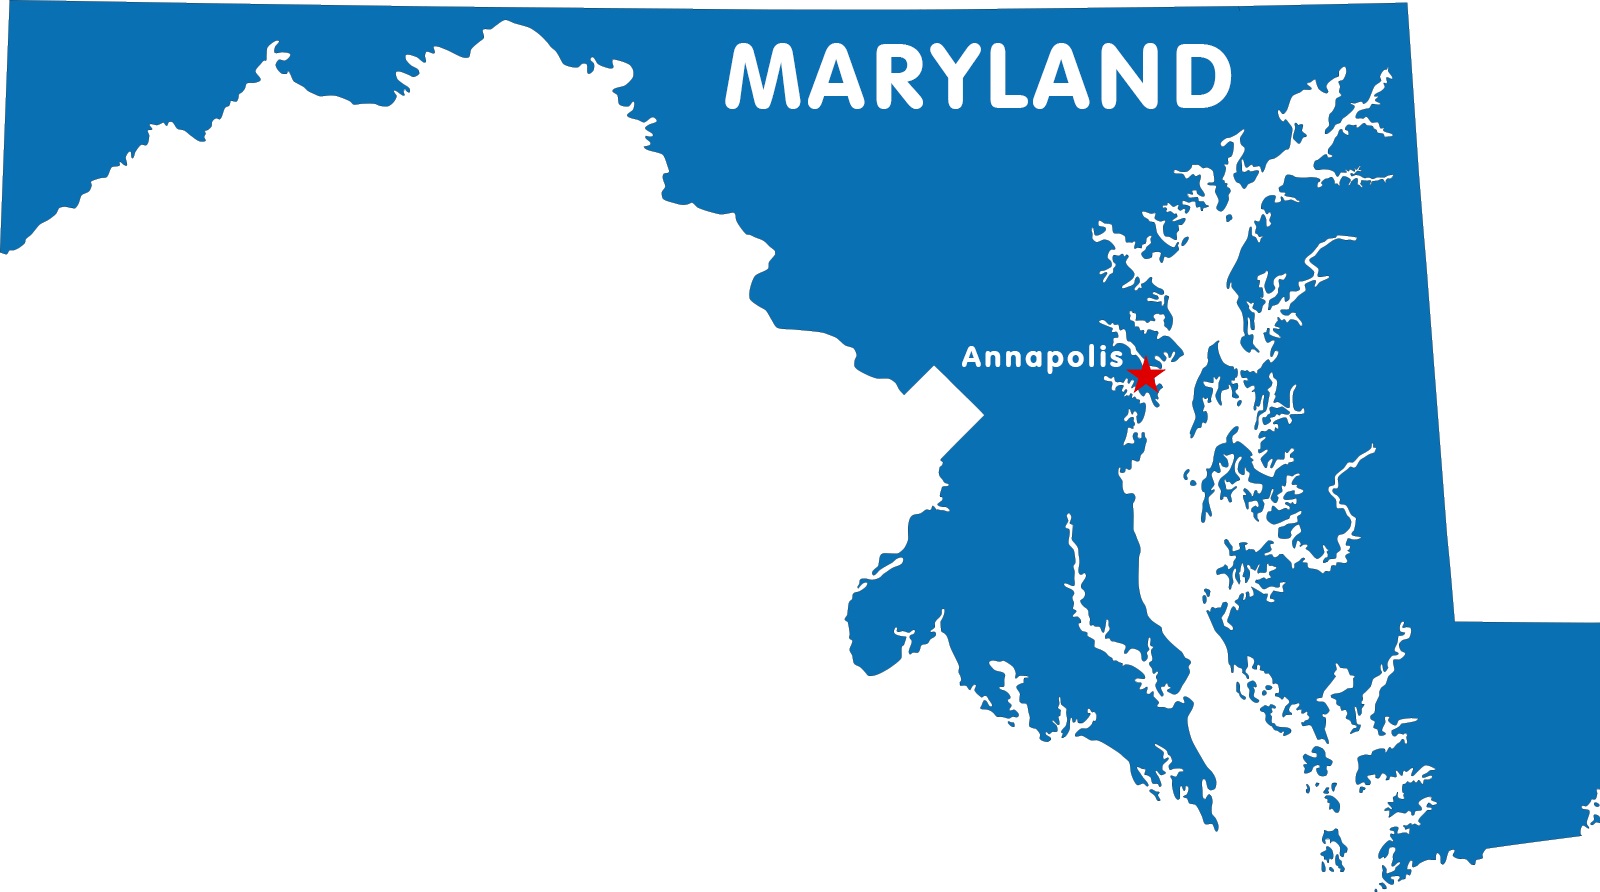 Maryland Capital Map | Large Printable High Resolution and Standard Map